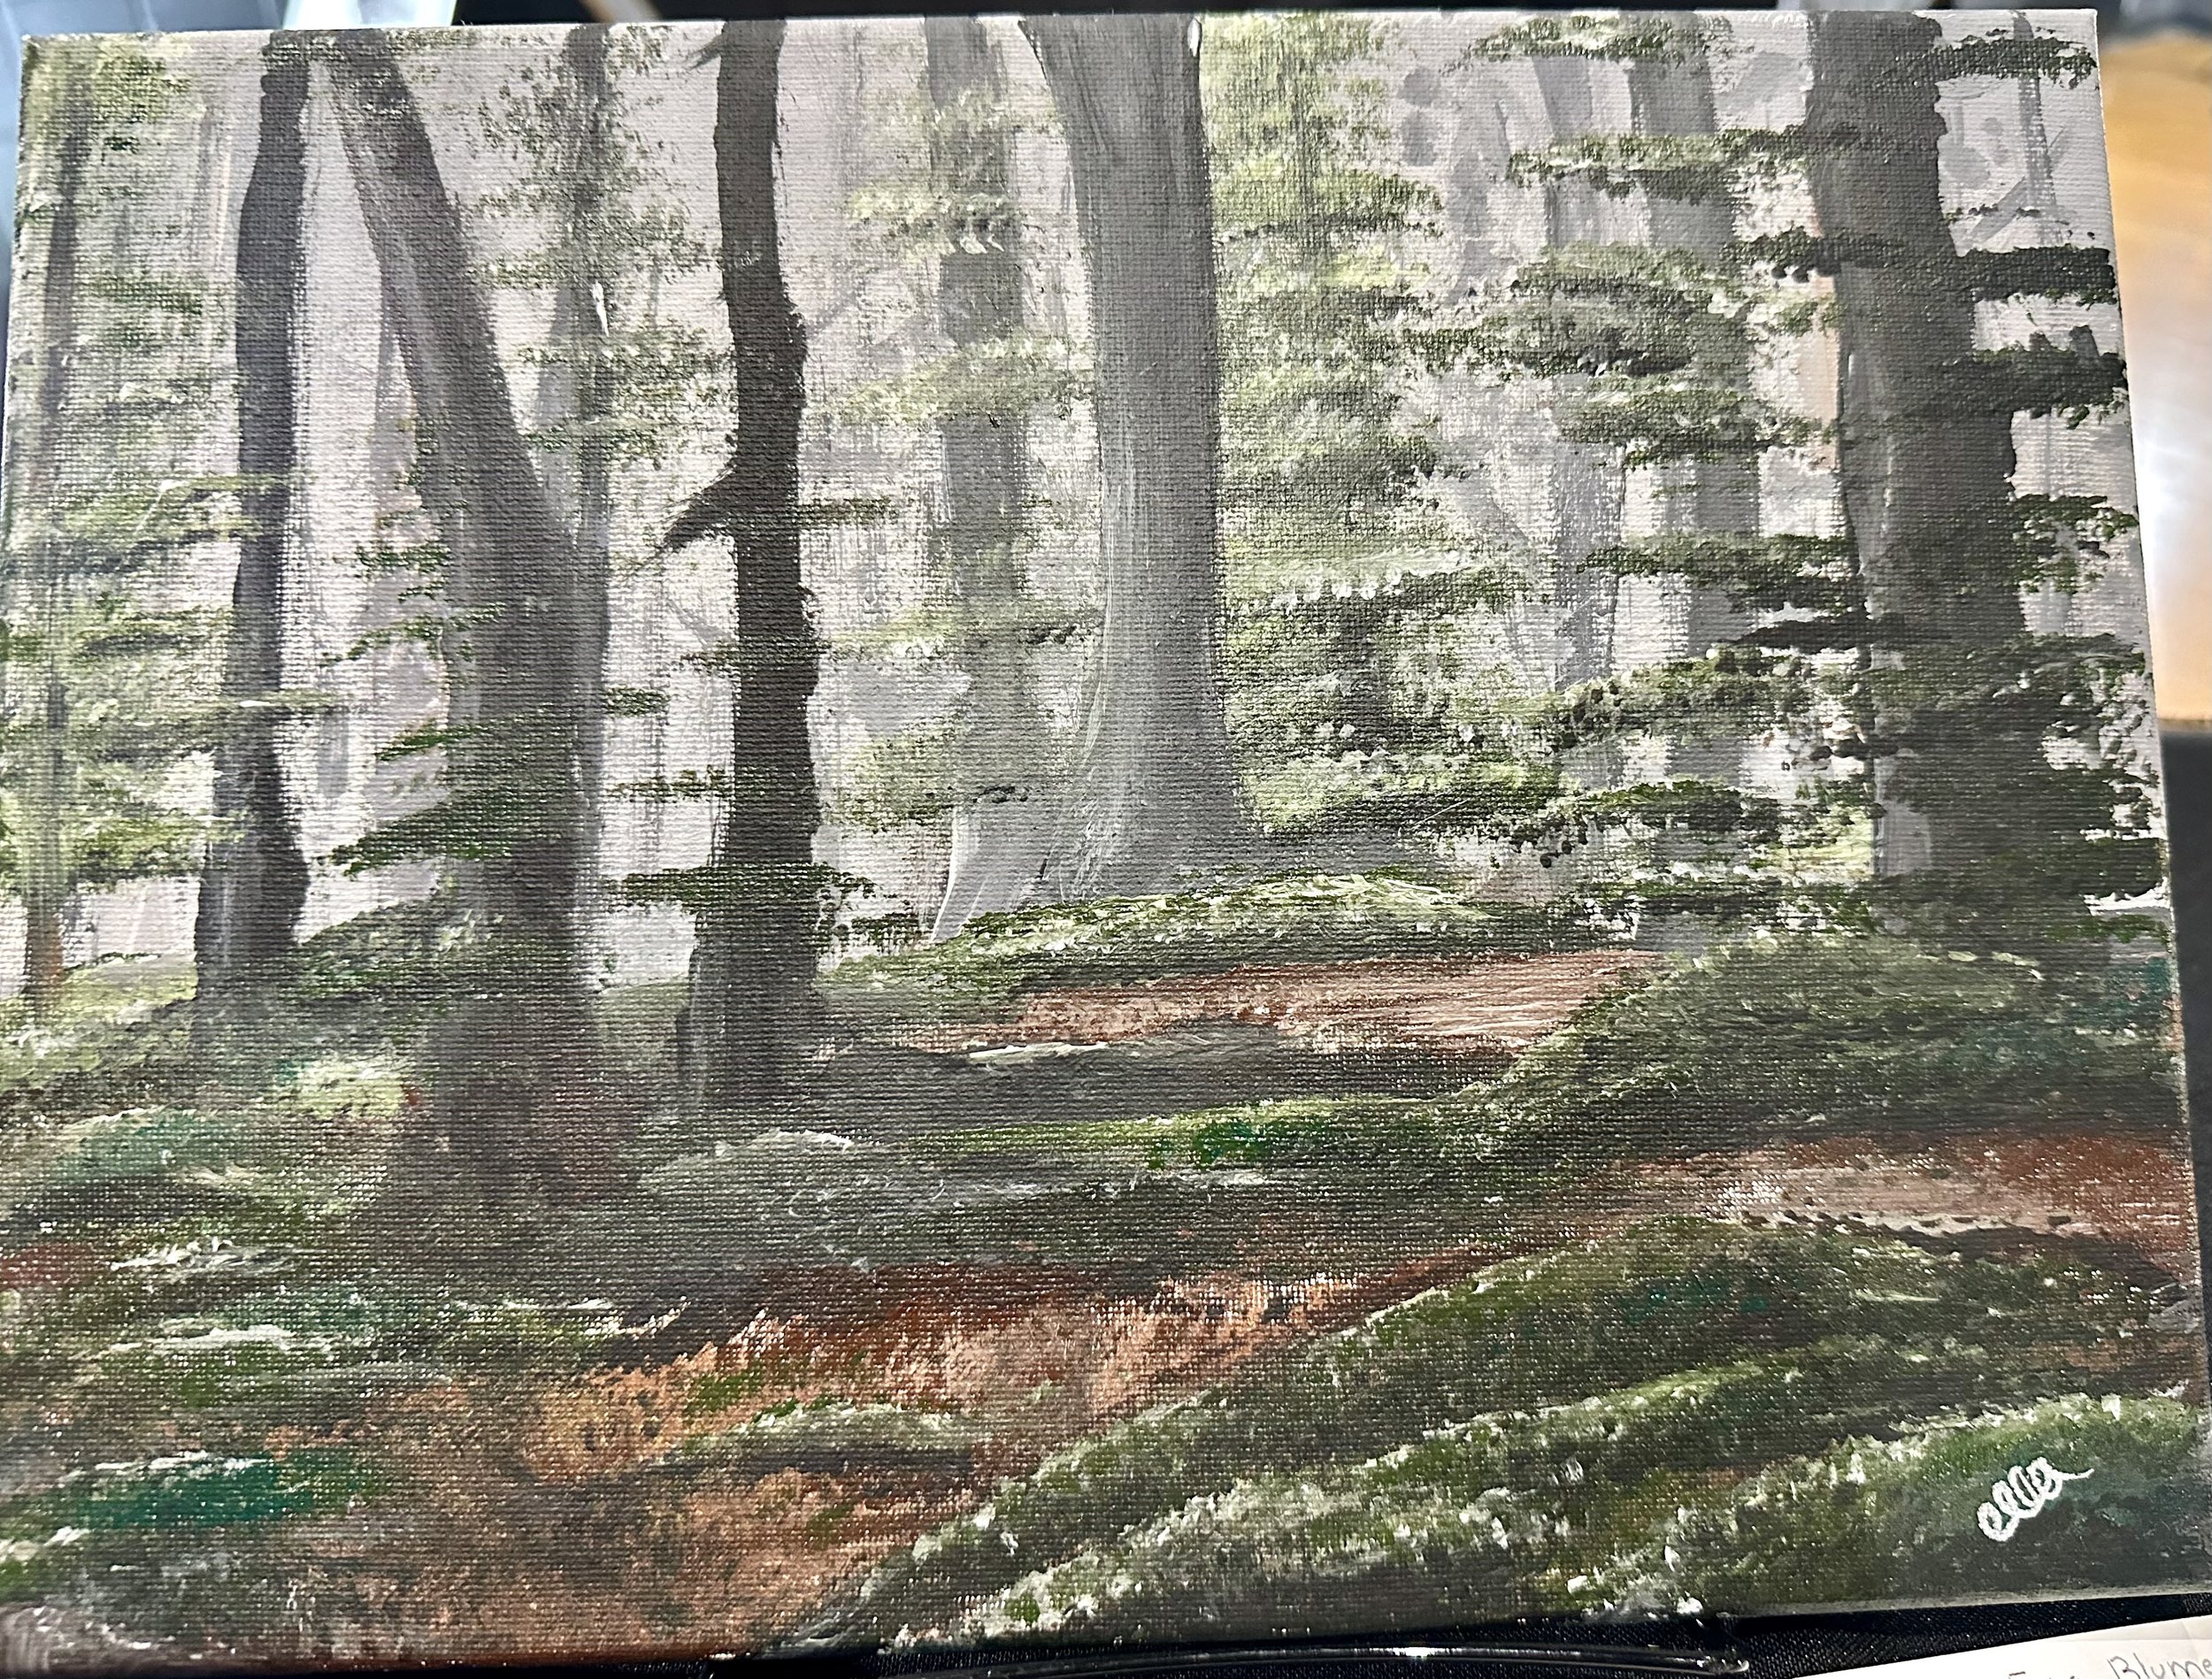 Painting Jr Winner- "Forest for the Trees"